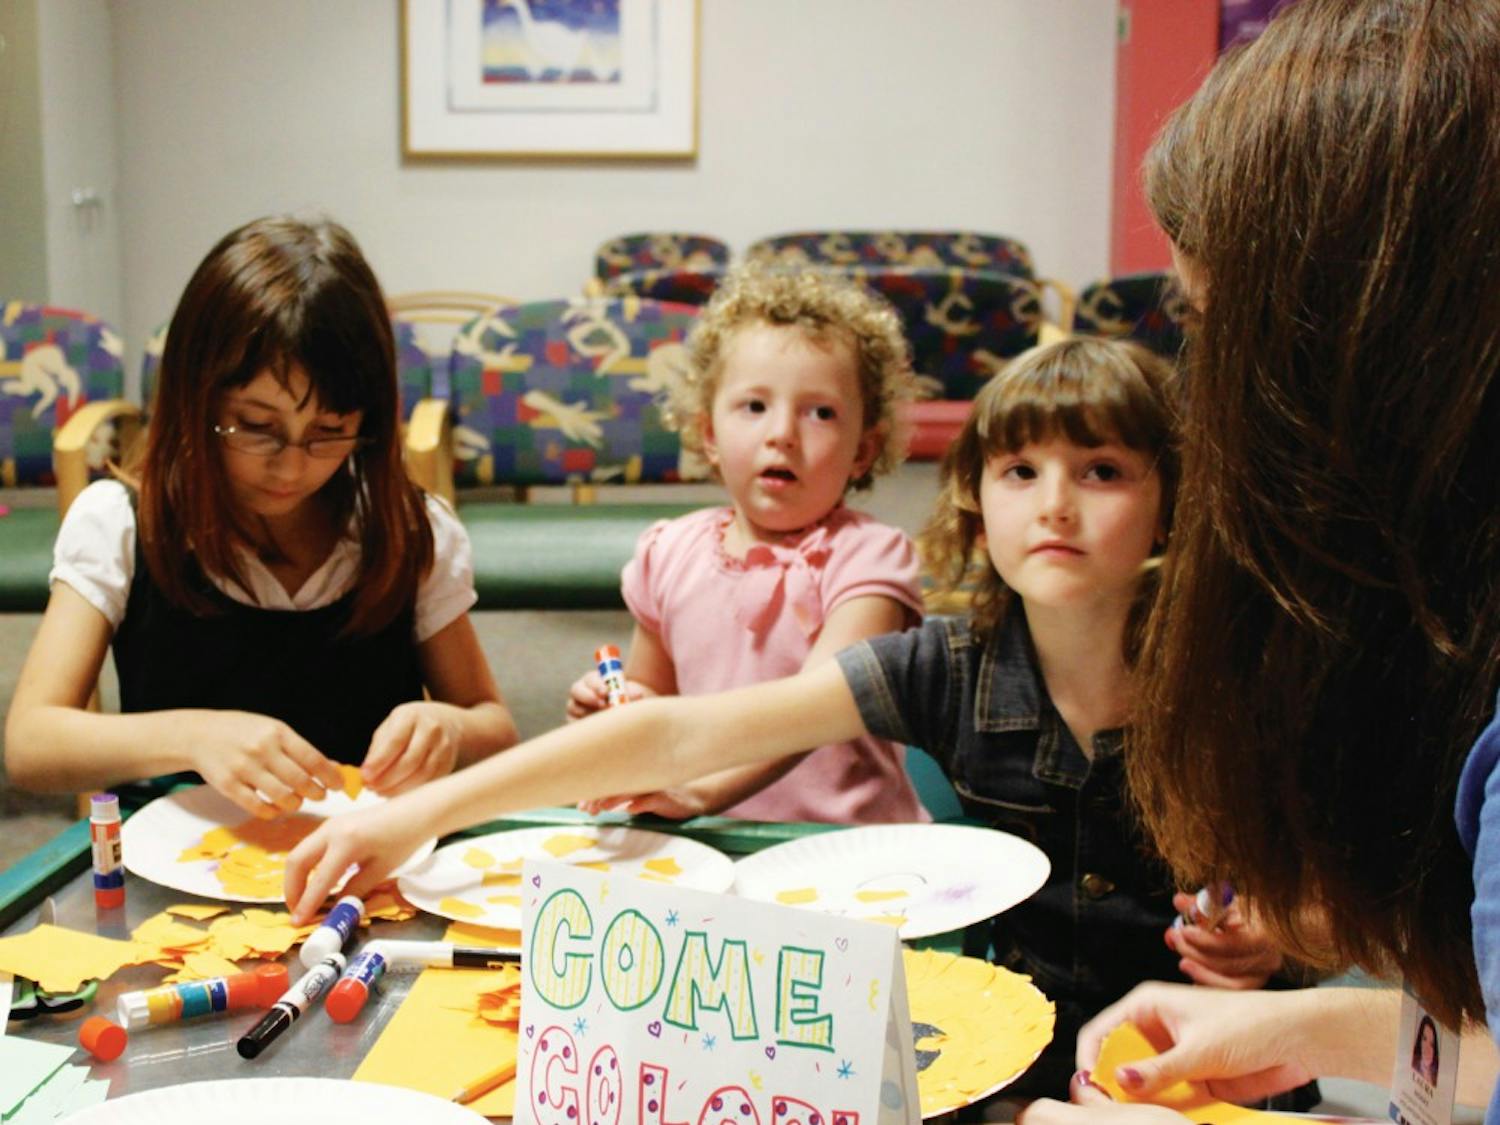 Sisters Dallas, April and Haily Ivey color and create paper jack-o-lanterns with ArtHeels at the UNC Children’s Hospital Tuesday afternoon. ArtHeels is a student volunteer organization that brings art and activities to pediatric and geriatric patients at UNC Hospitals.